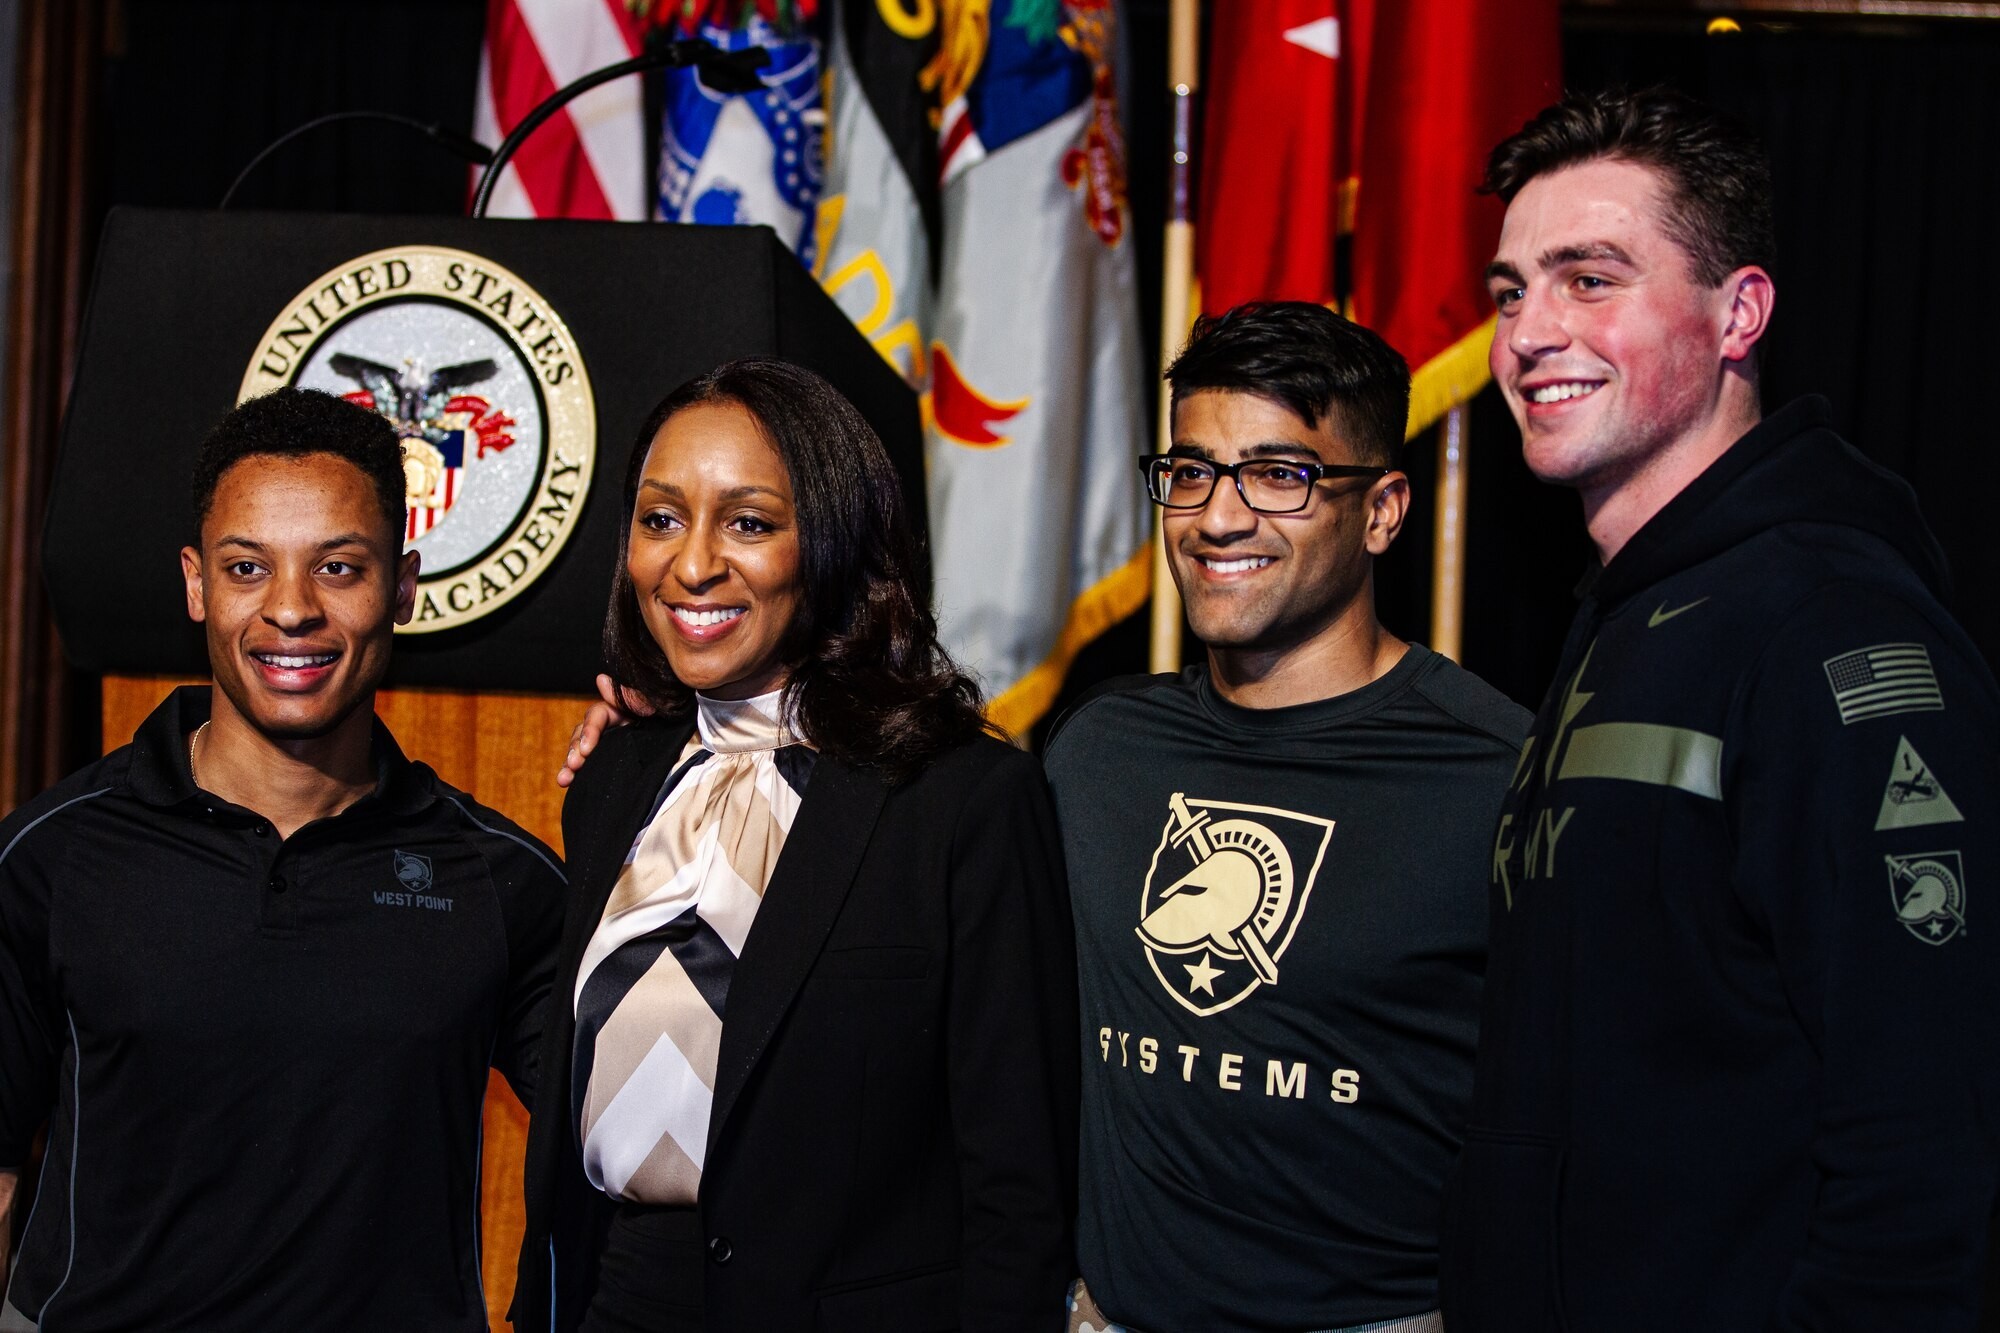 West Point Celebrates Its 221st Birthday During Founders Day Article